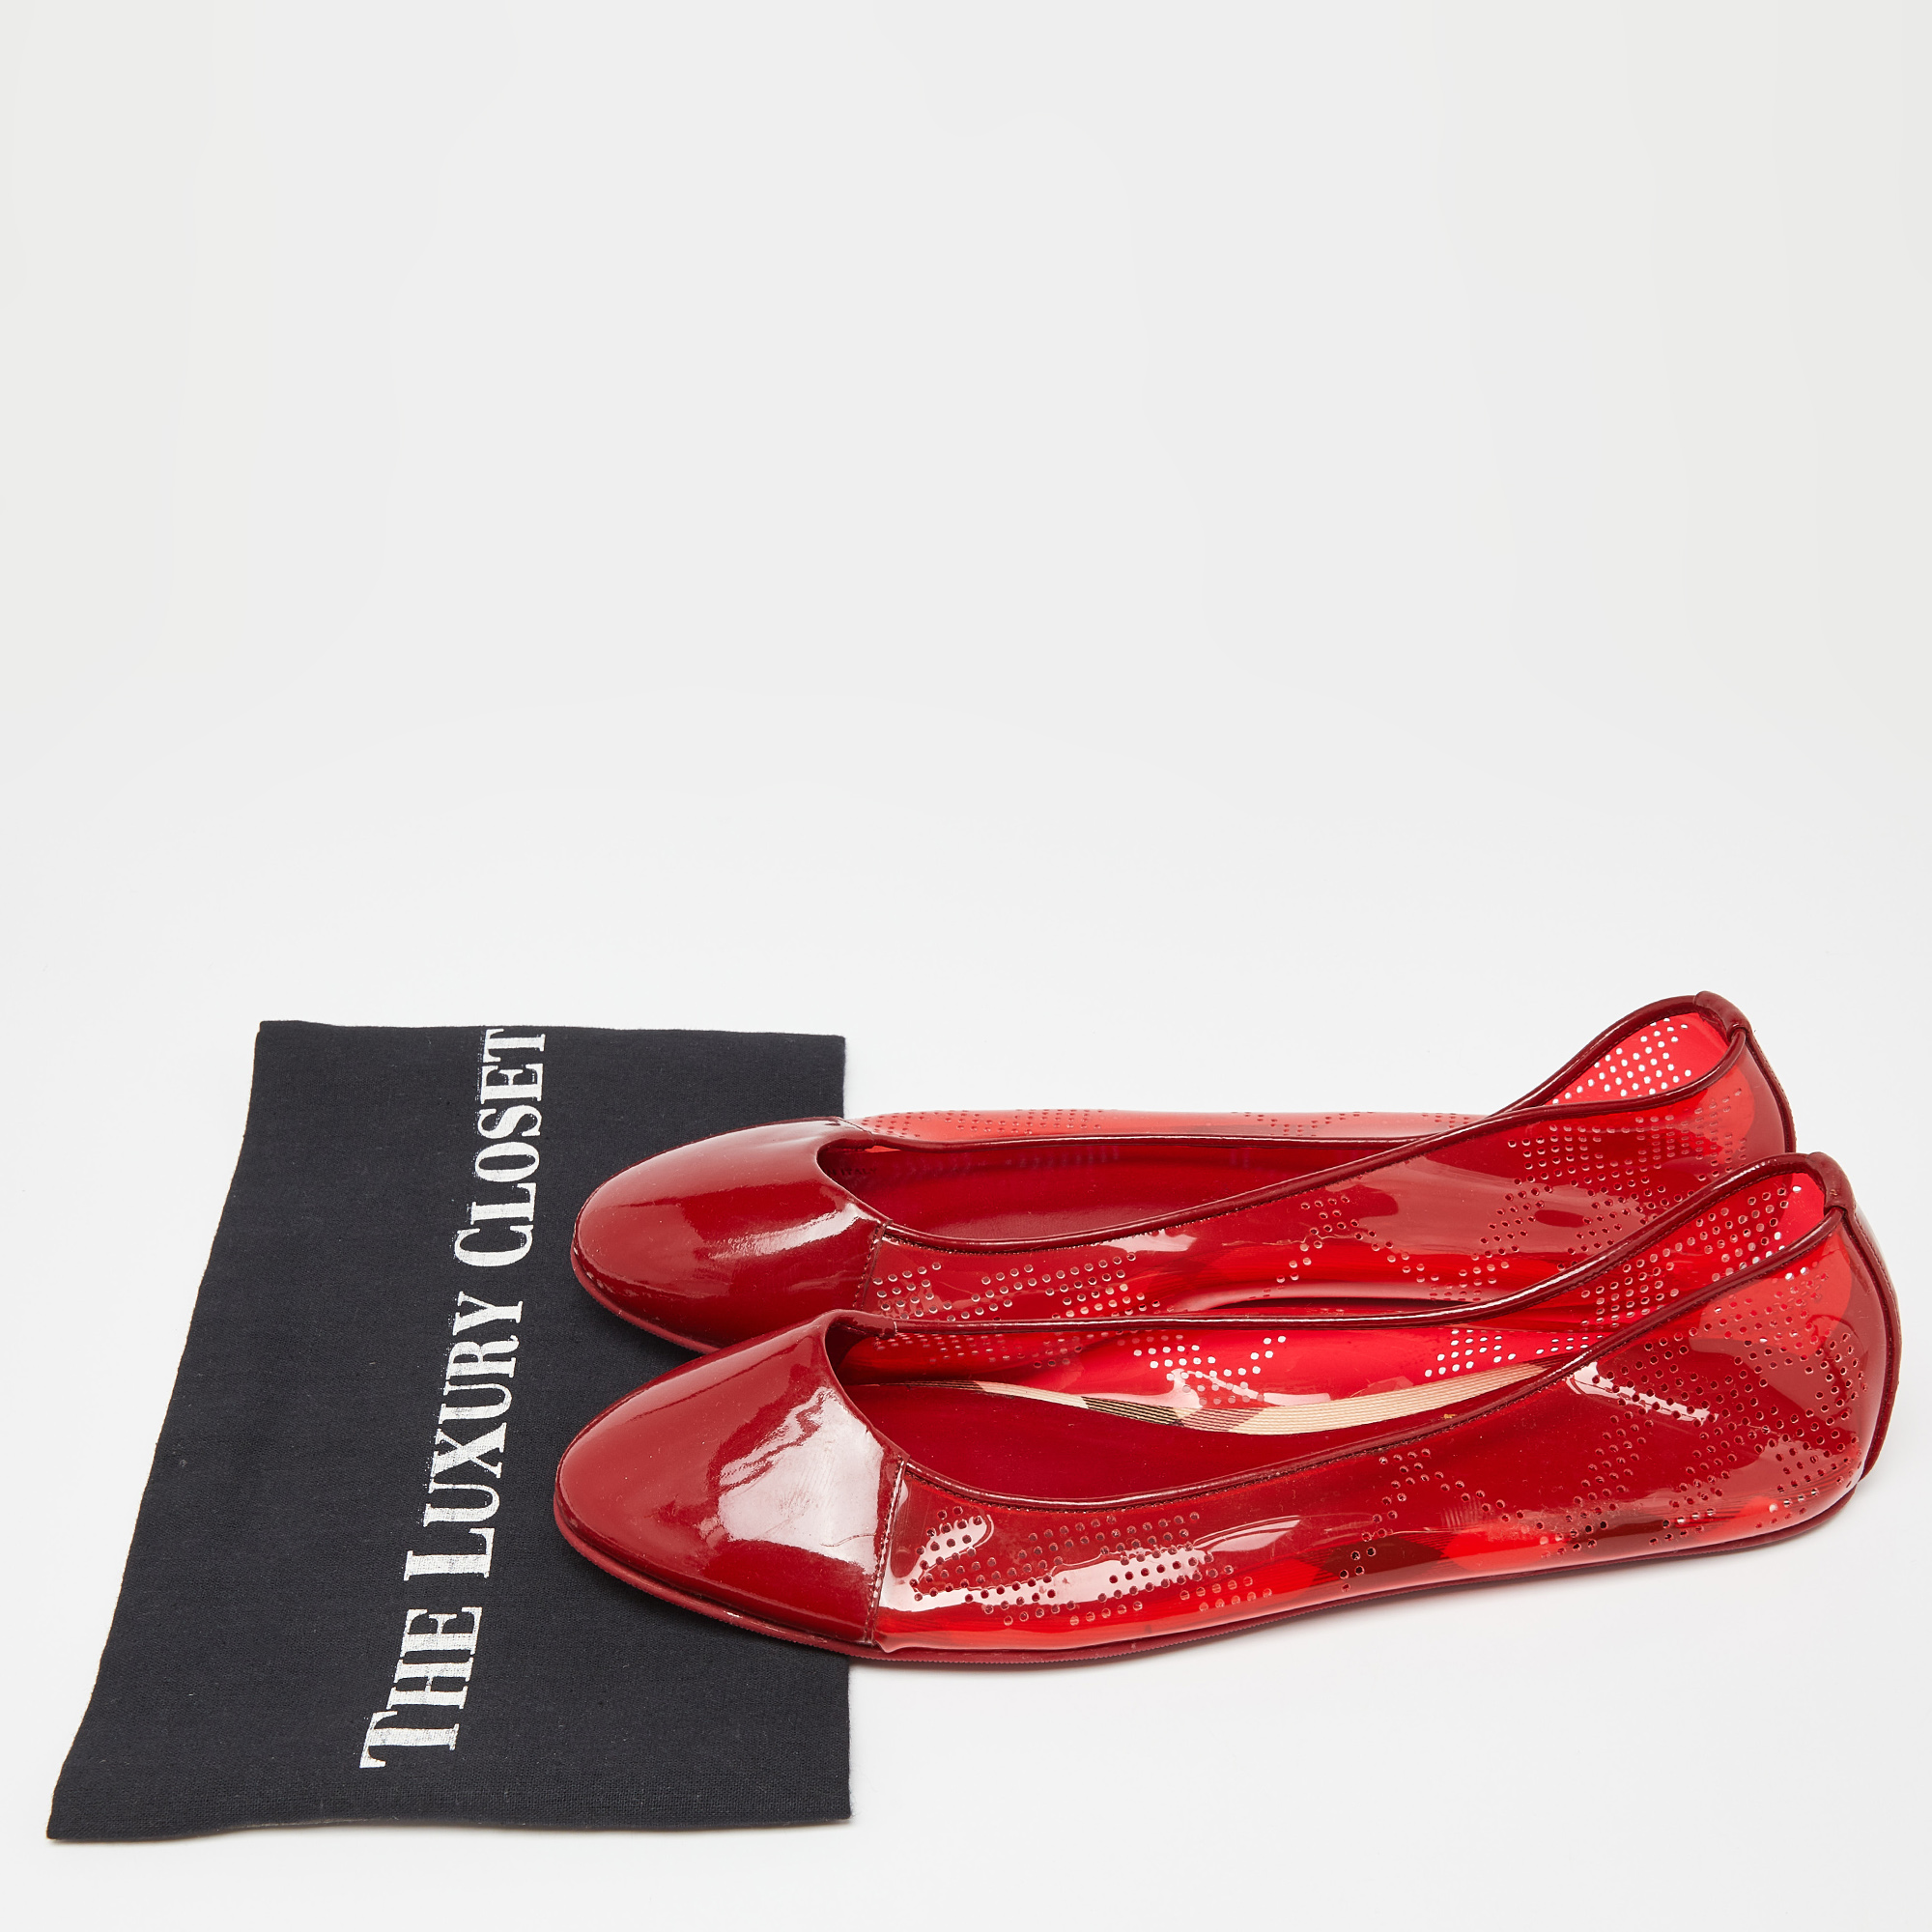 Burberry Red PVC And Patent Cap Toe Ballet Flats Size 41